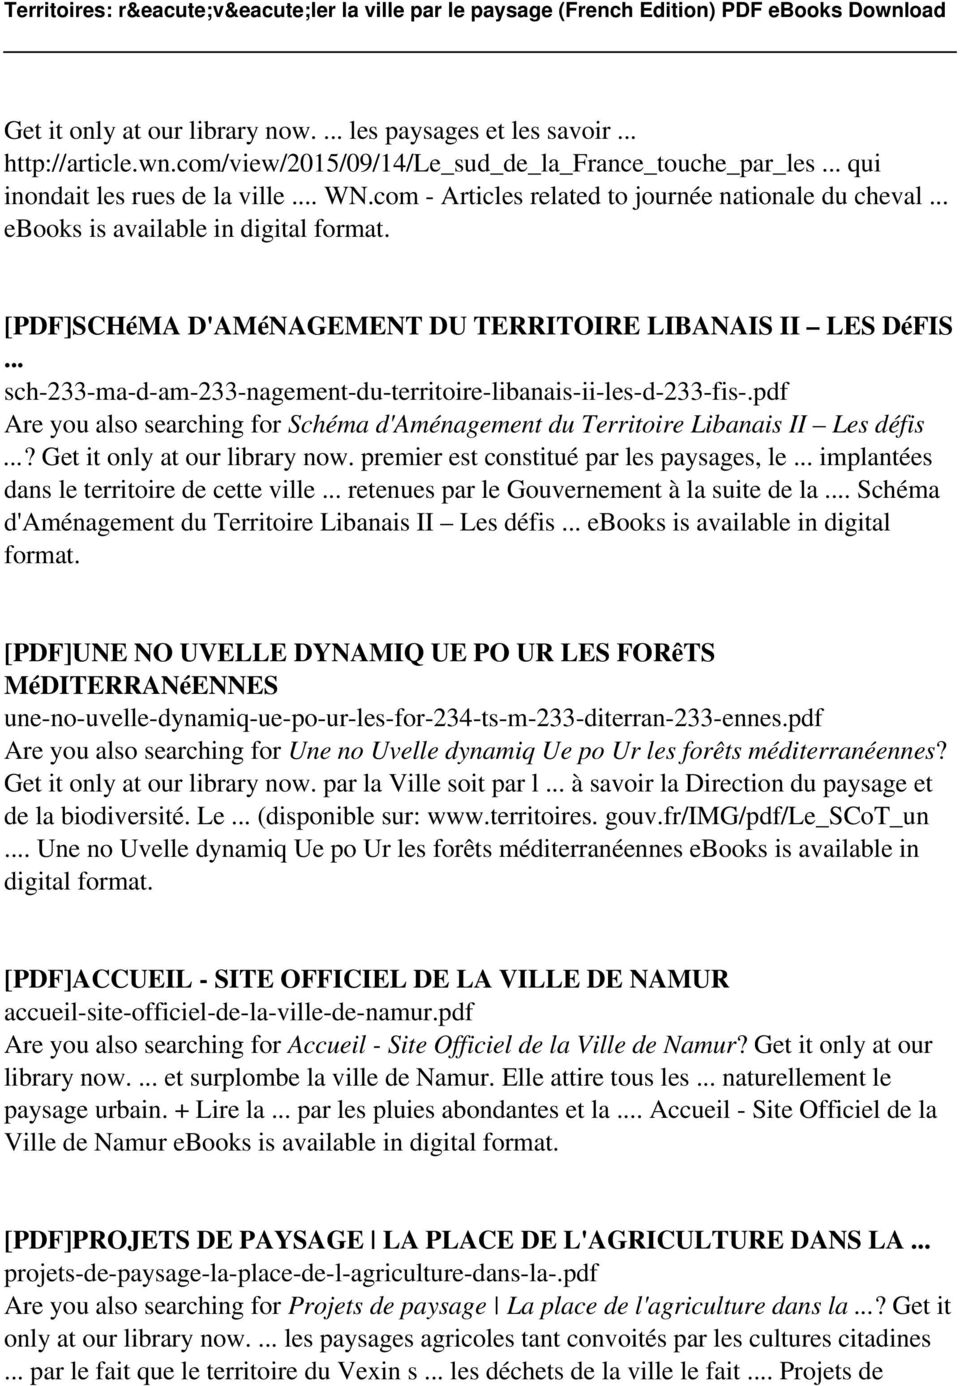 .. sch-233-ma-d-am-233-nagement-du-territoire-libanais-ii-les-d-233-fis-.pdf Are you also searching for Schéma d'aménagement du Territoire Libanais II Les défis...? Get it only at our library now.